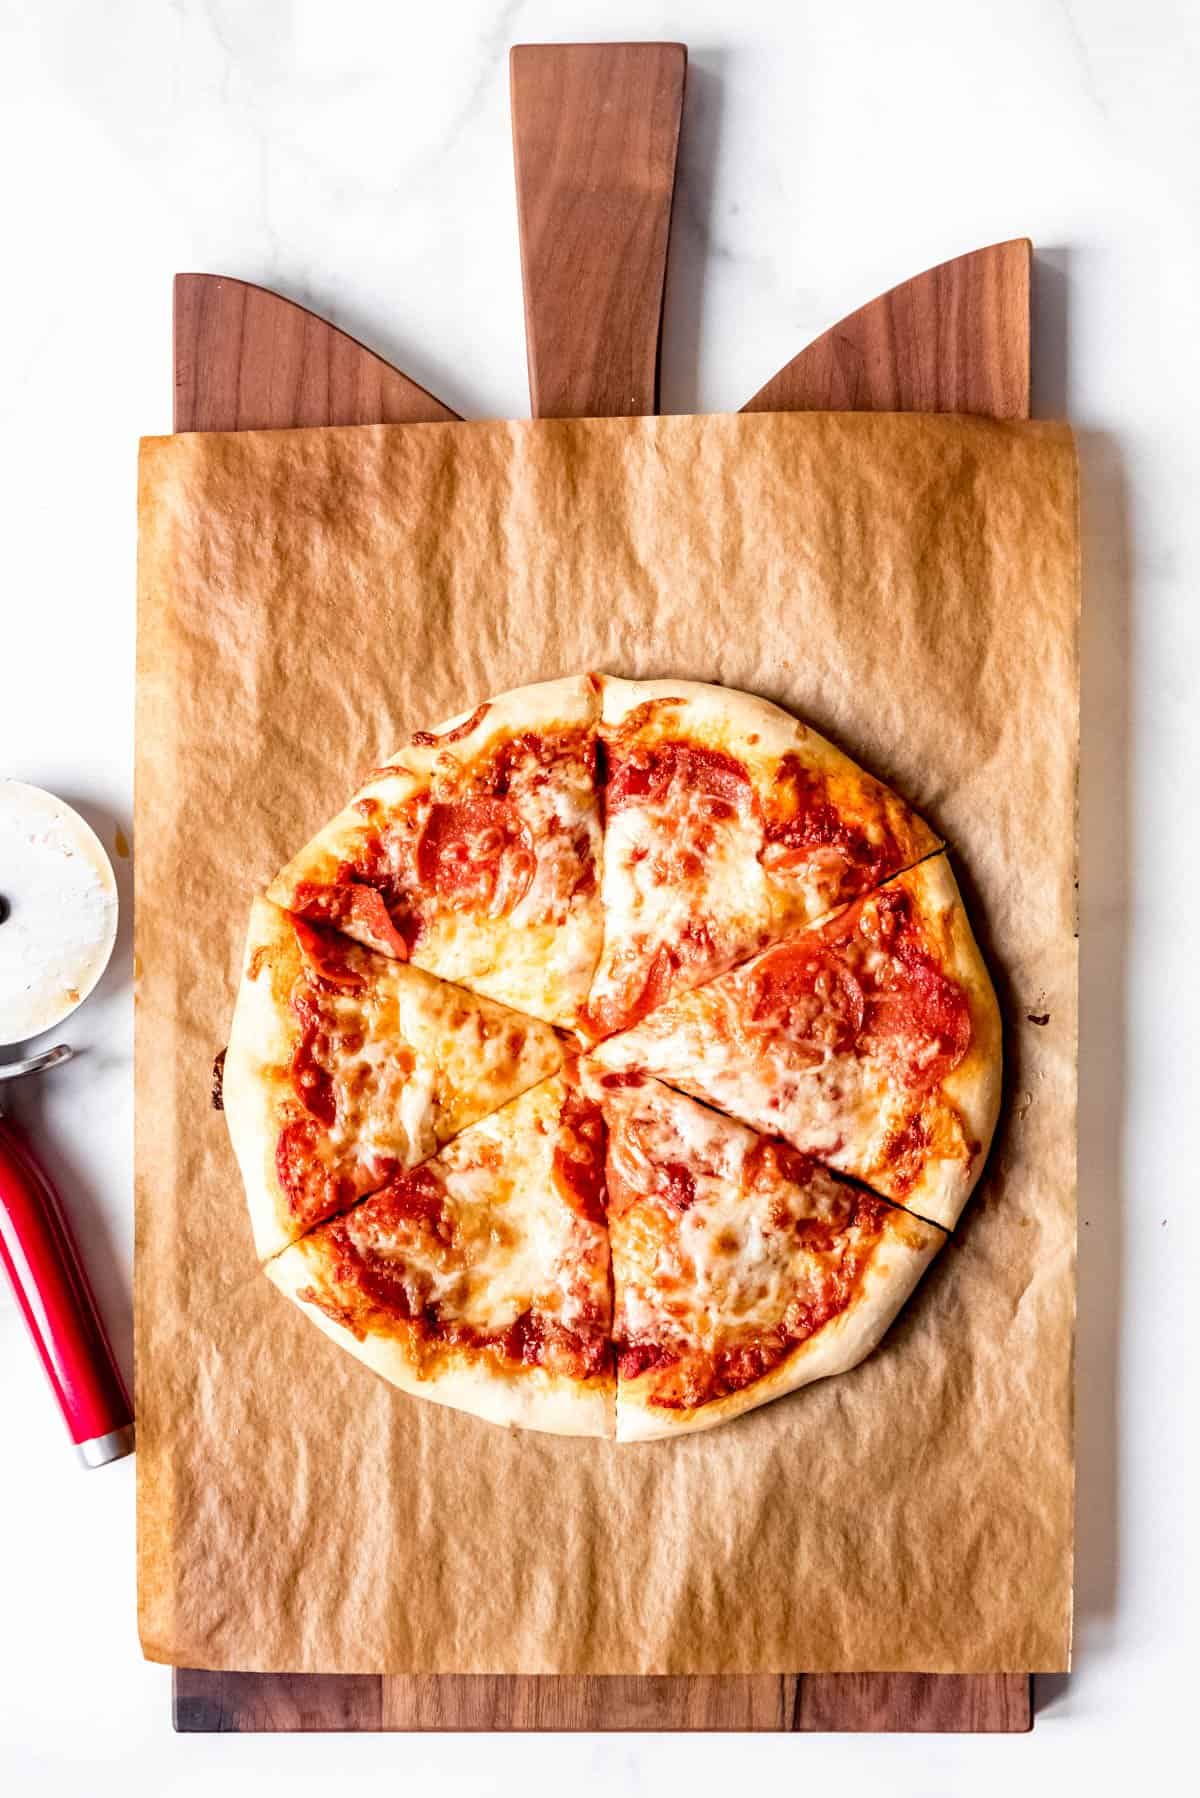 An image of a homemade pepperoni pizza on a cutting board.